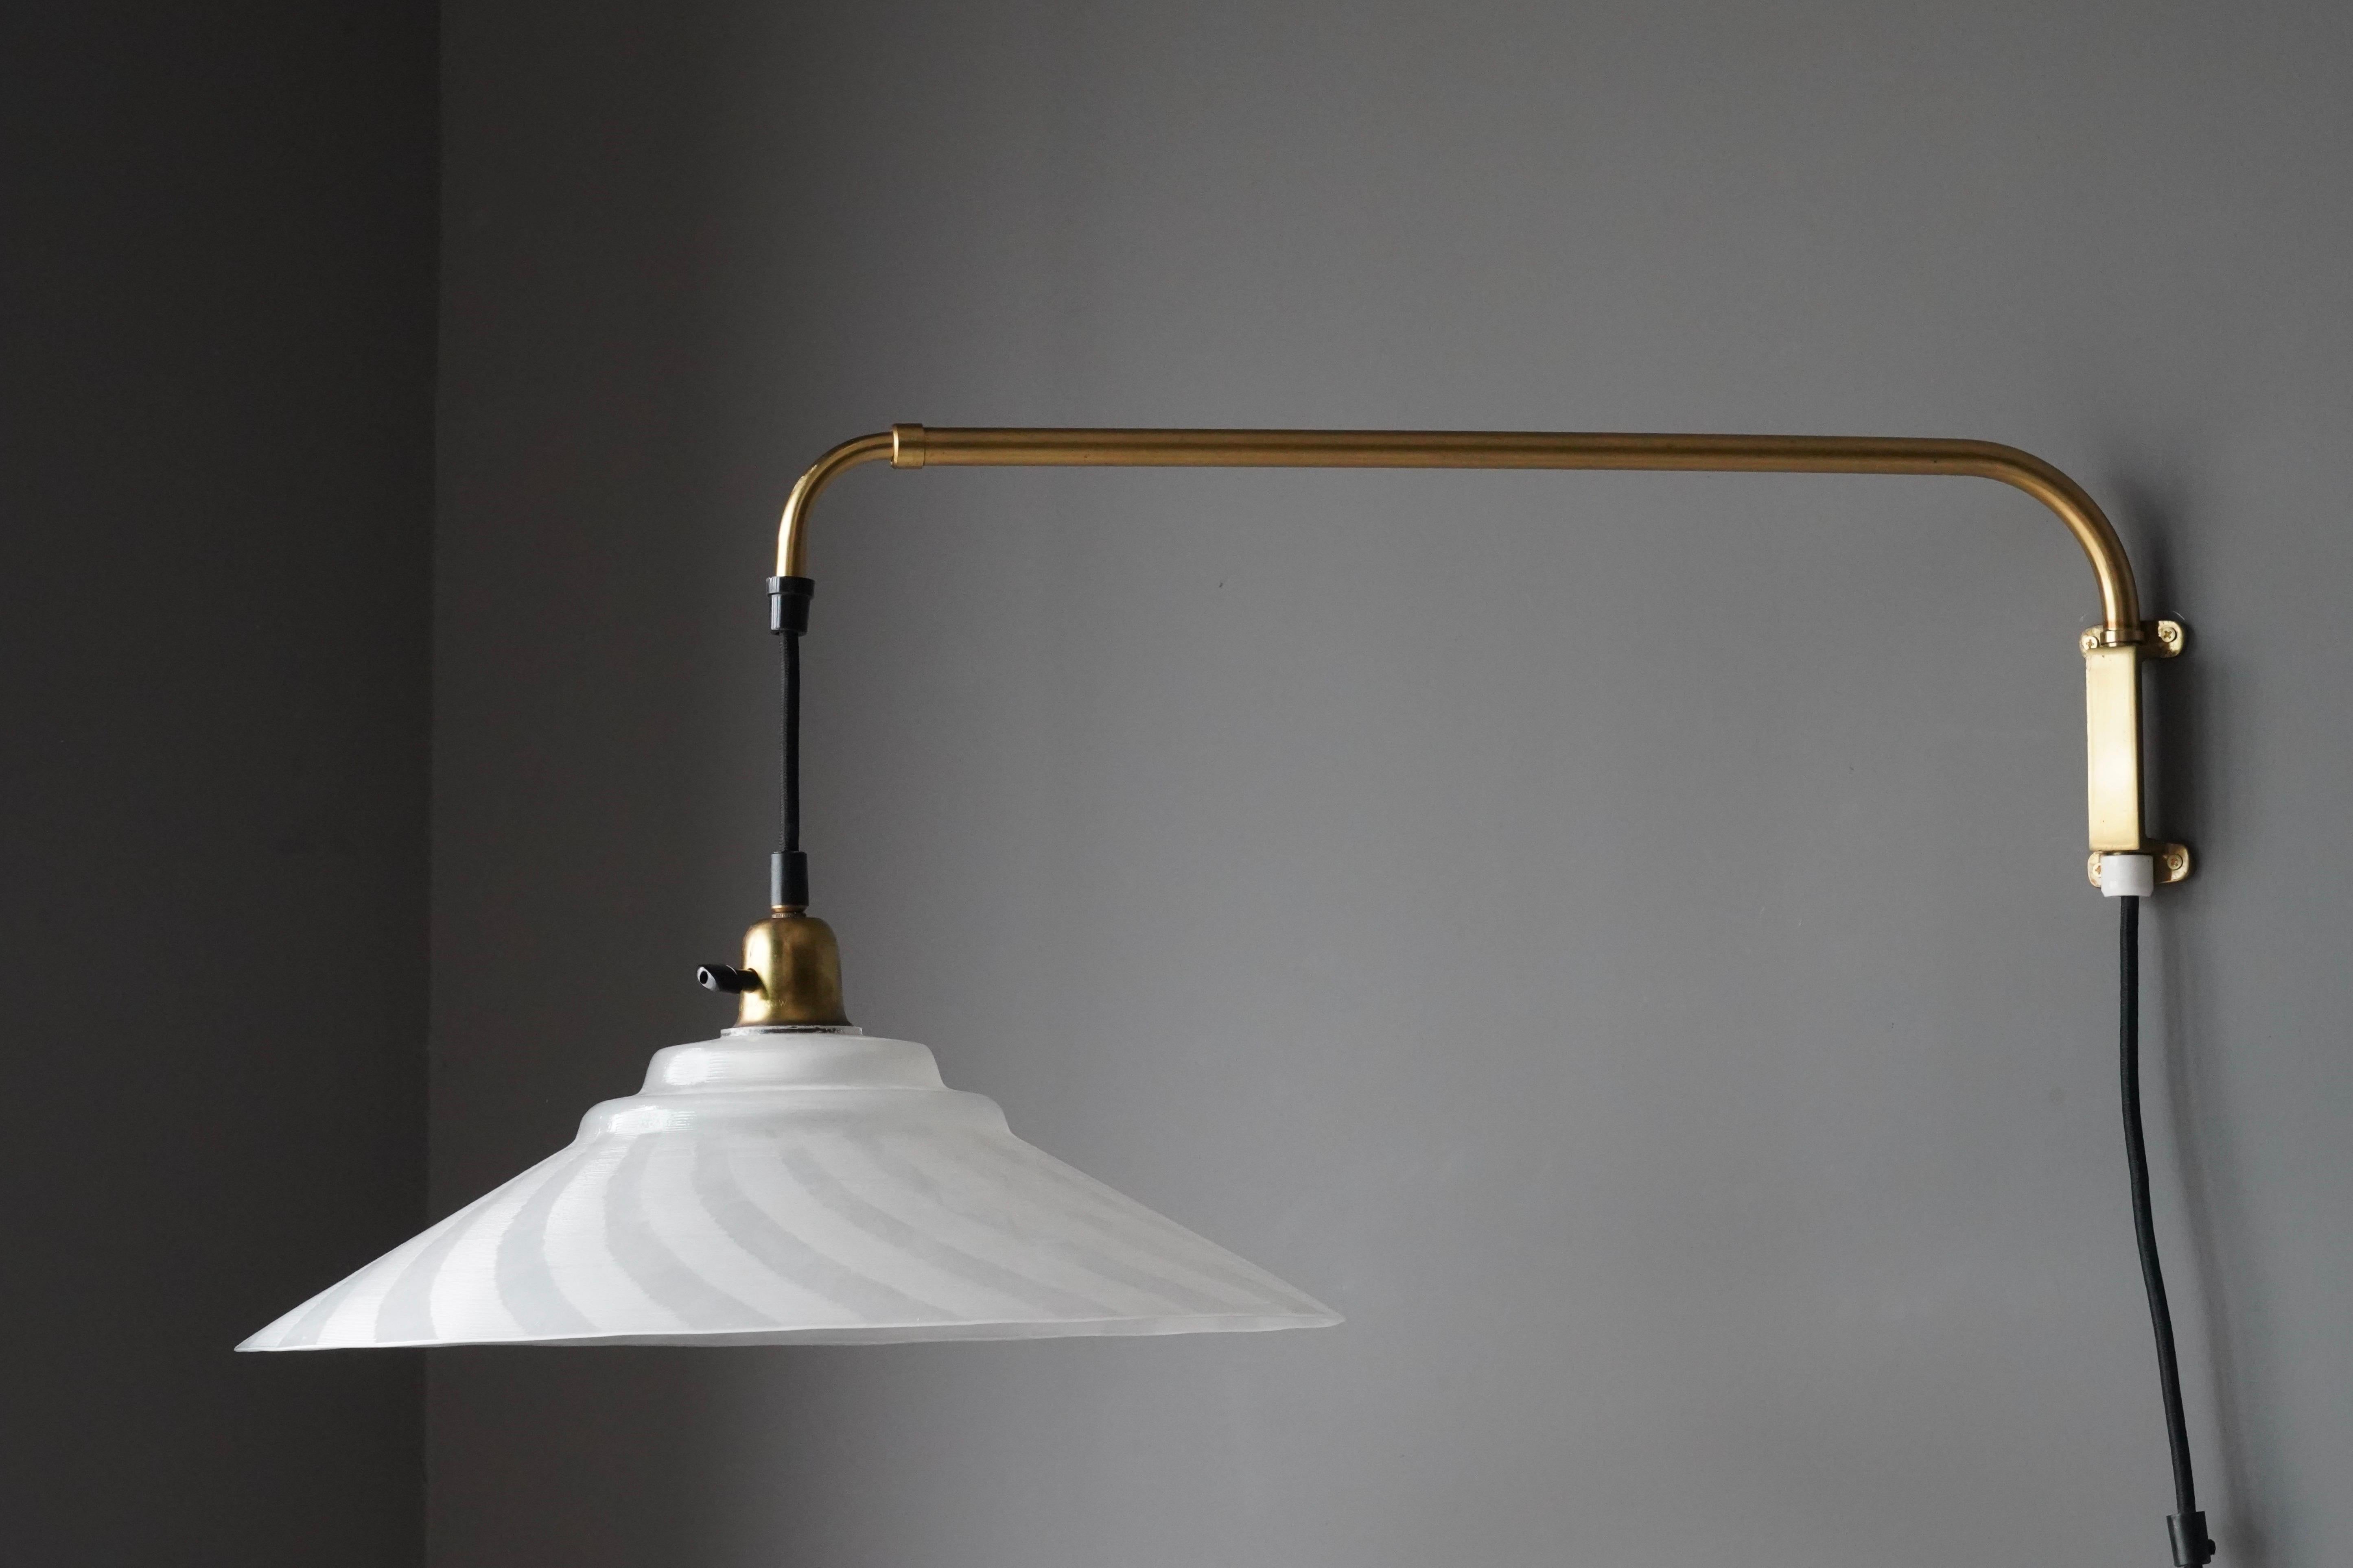 An adjustable wall light / task light. Designed and produced in Sweden, 1960s. Features brass and frosted glass. Telescopic arm.

Dimensions are measured with glass shade and when not extended. Arm extends an additional 10.5 inches.